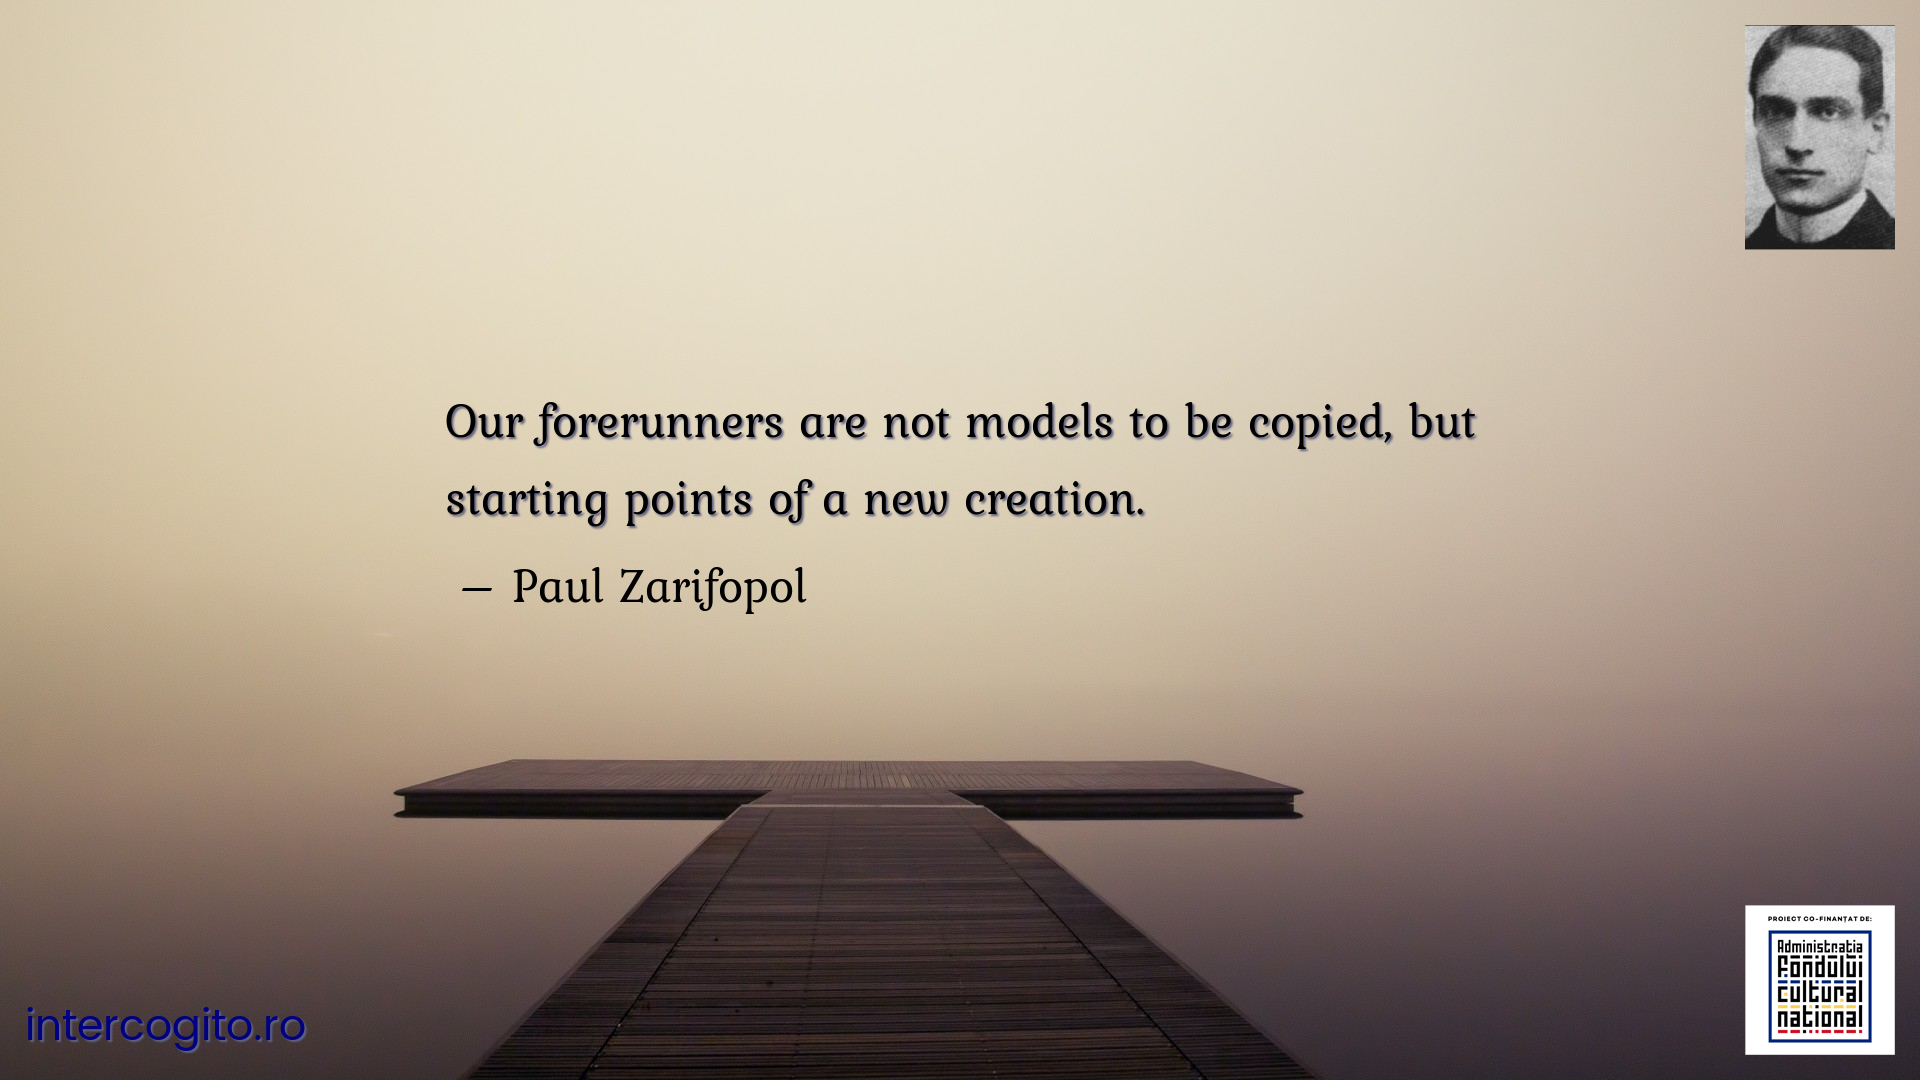 Our forerunners are not models to be copied, but starting points of a new creation.